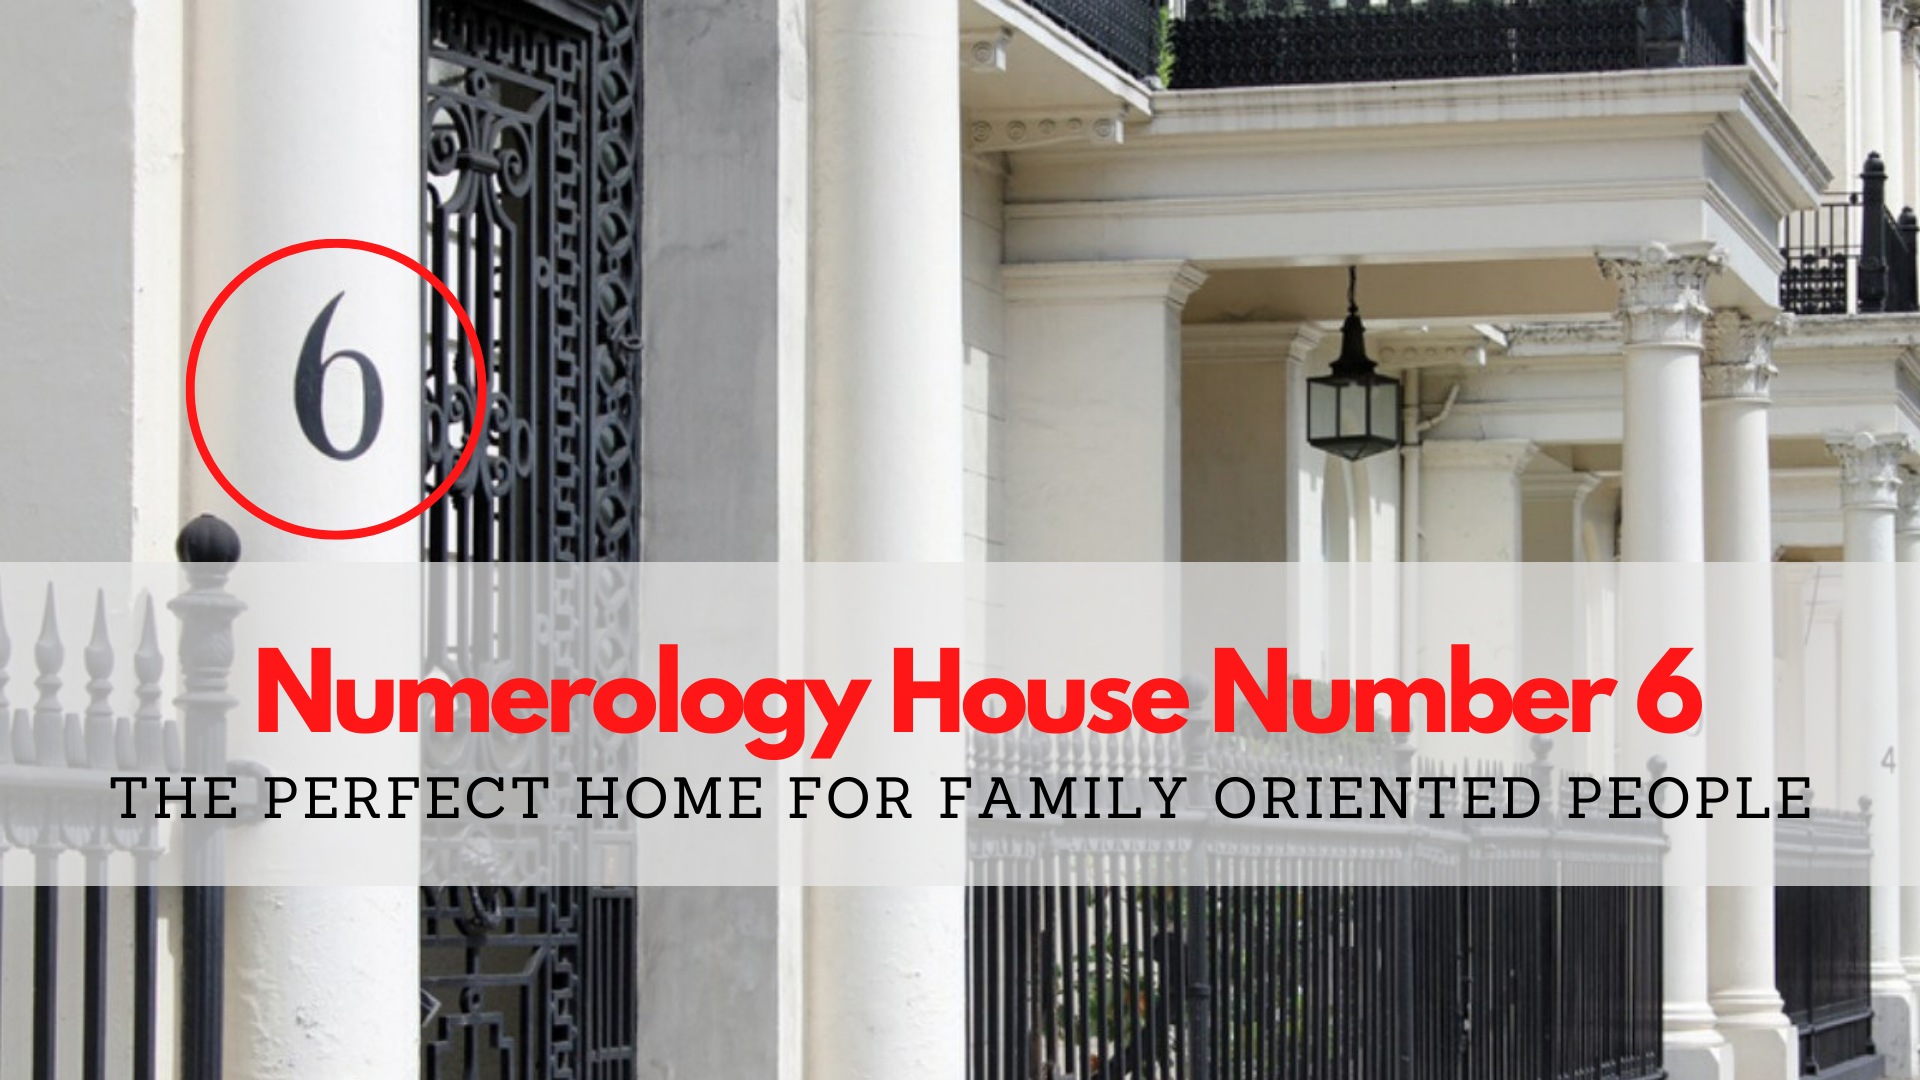 Numerology House Number 6 - The Perfect Home For Family-Oriented People